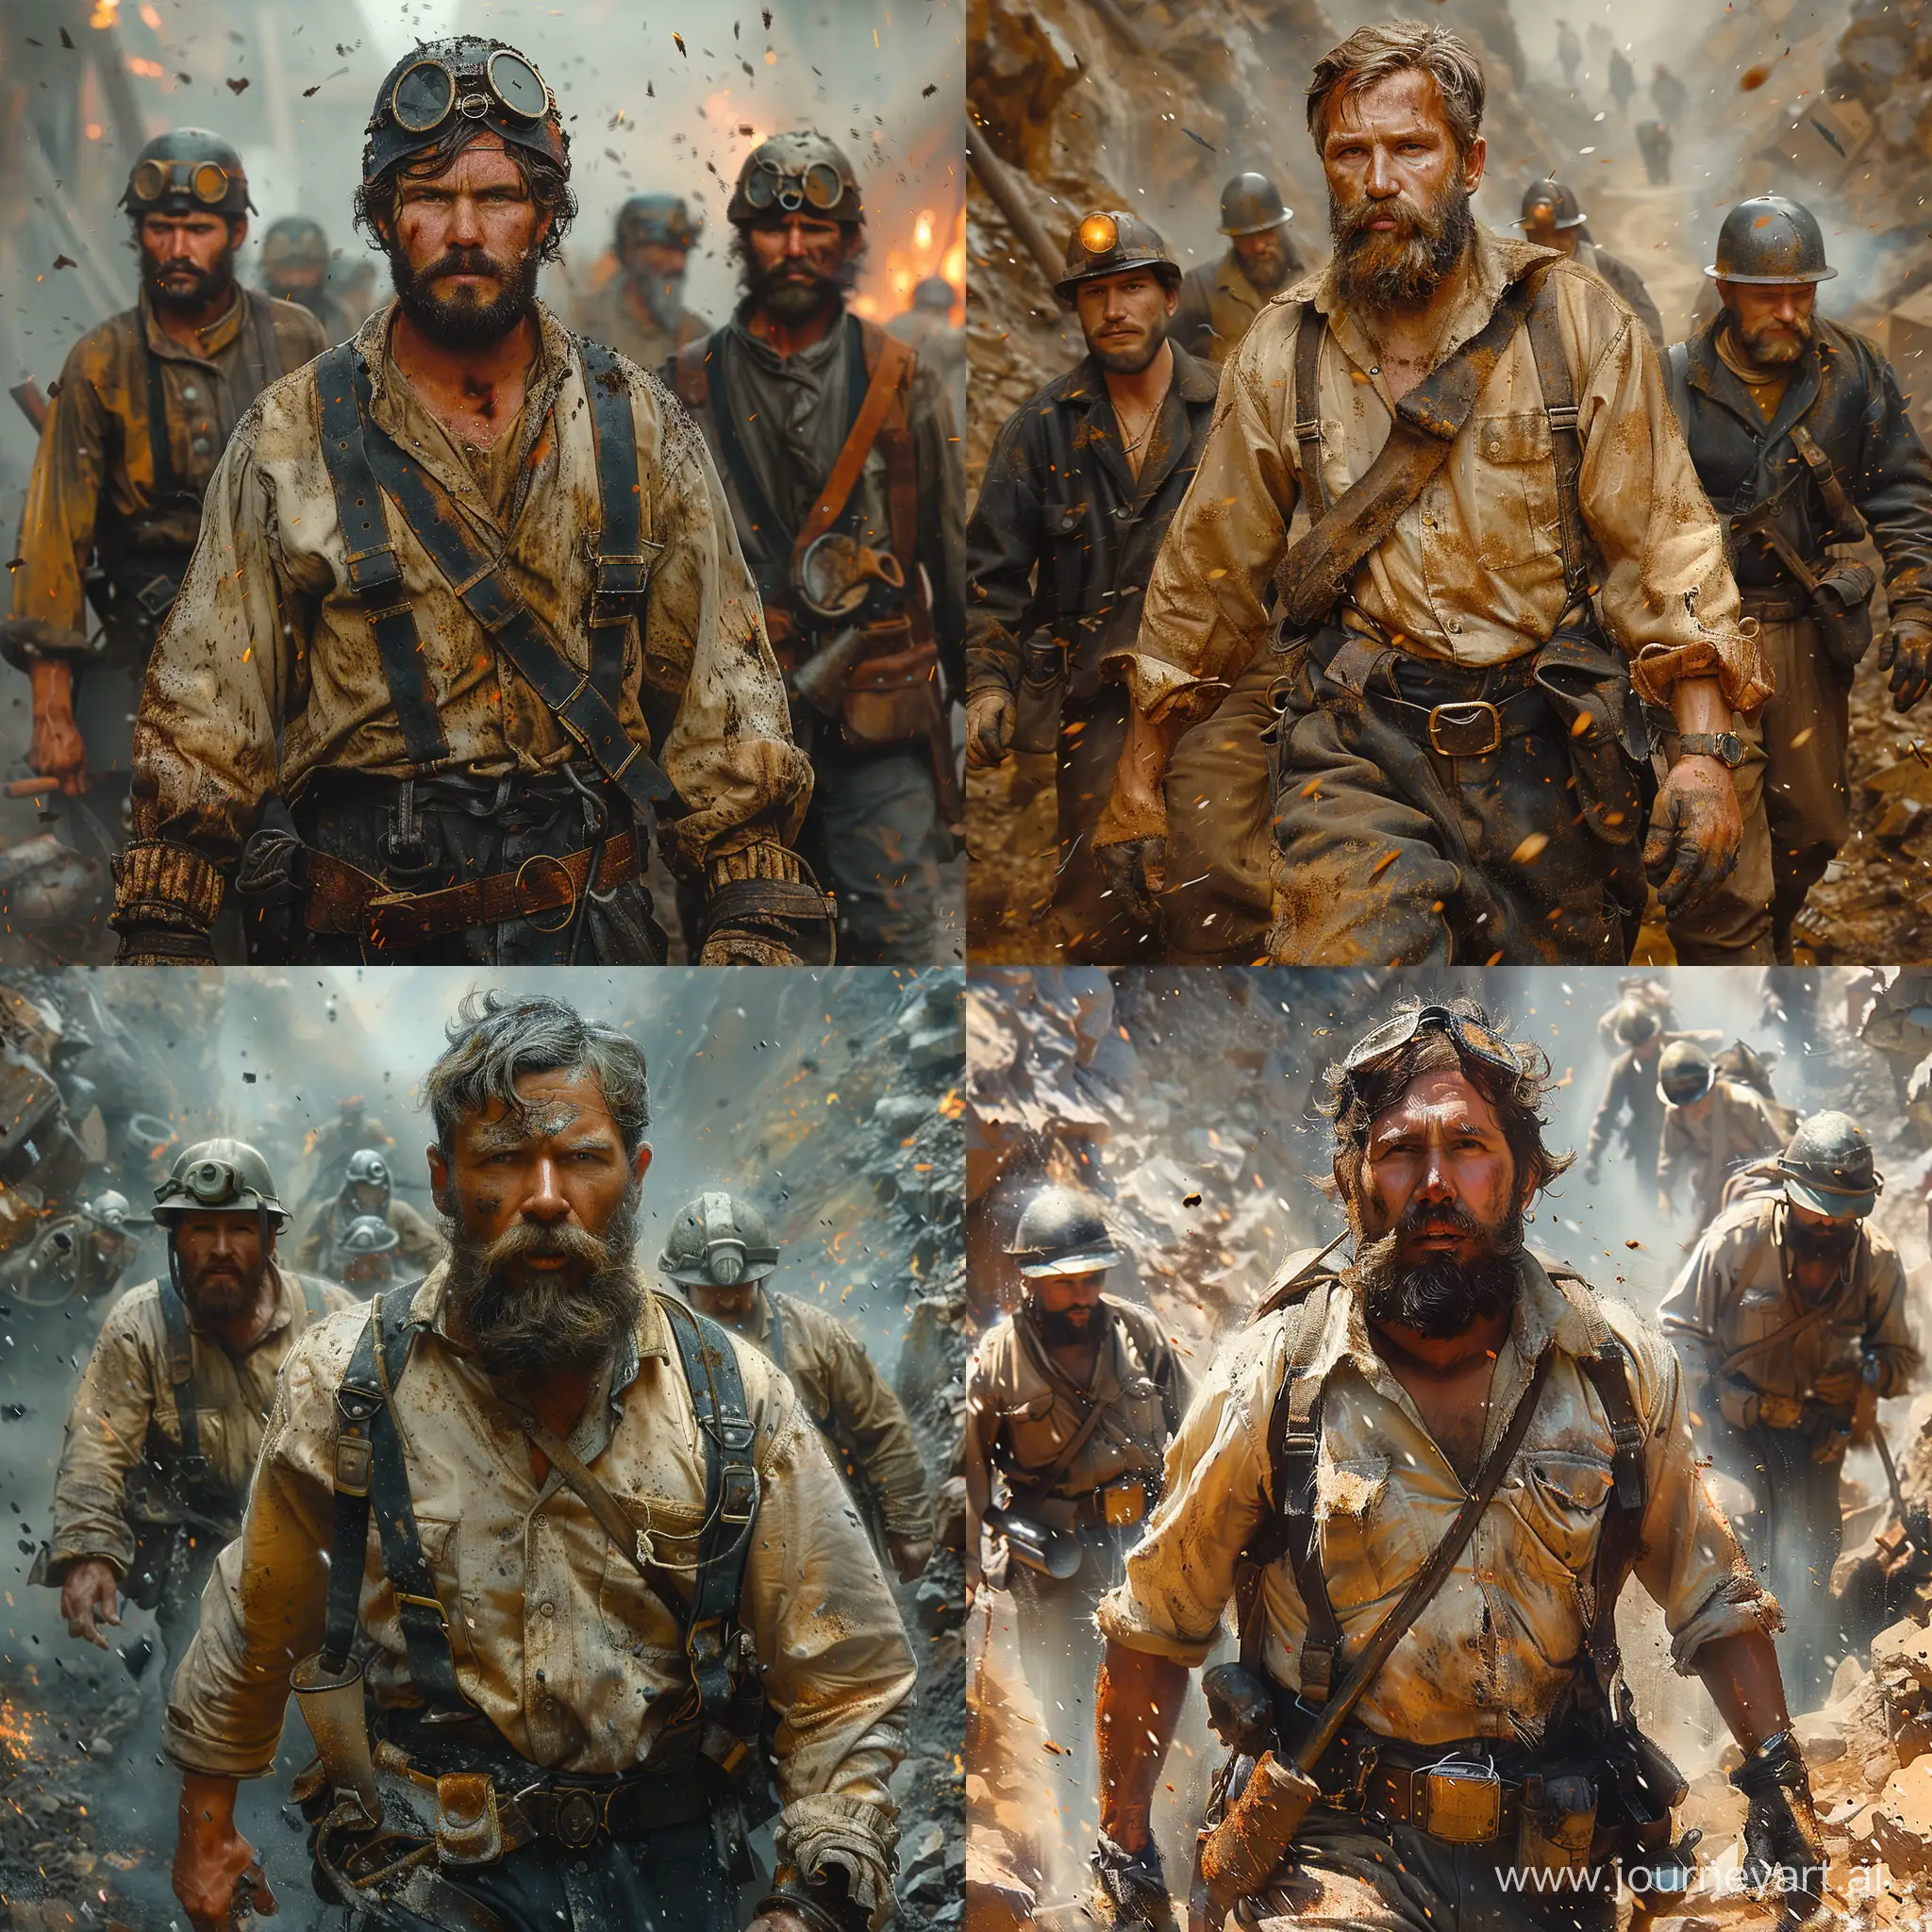 Realistic-Painting-of-1850s-Miners-at-Work